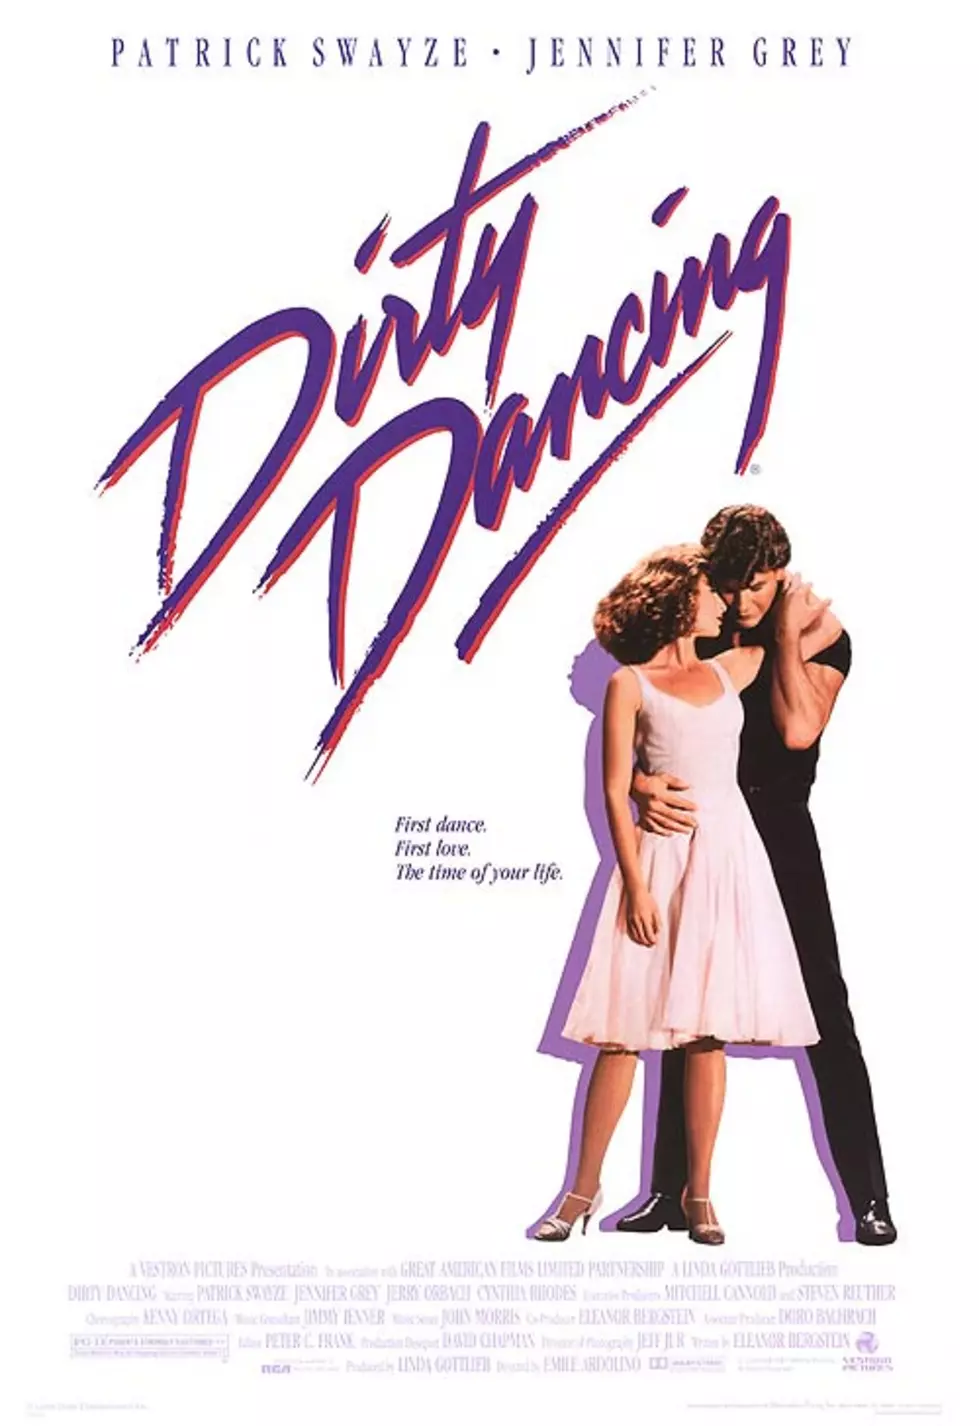 Inspiration for ‘Dirty Dancing’ Lives in Hudson Valley